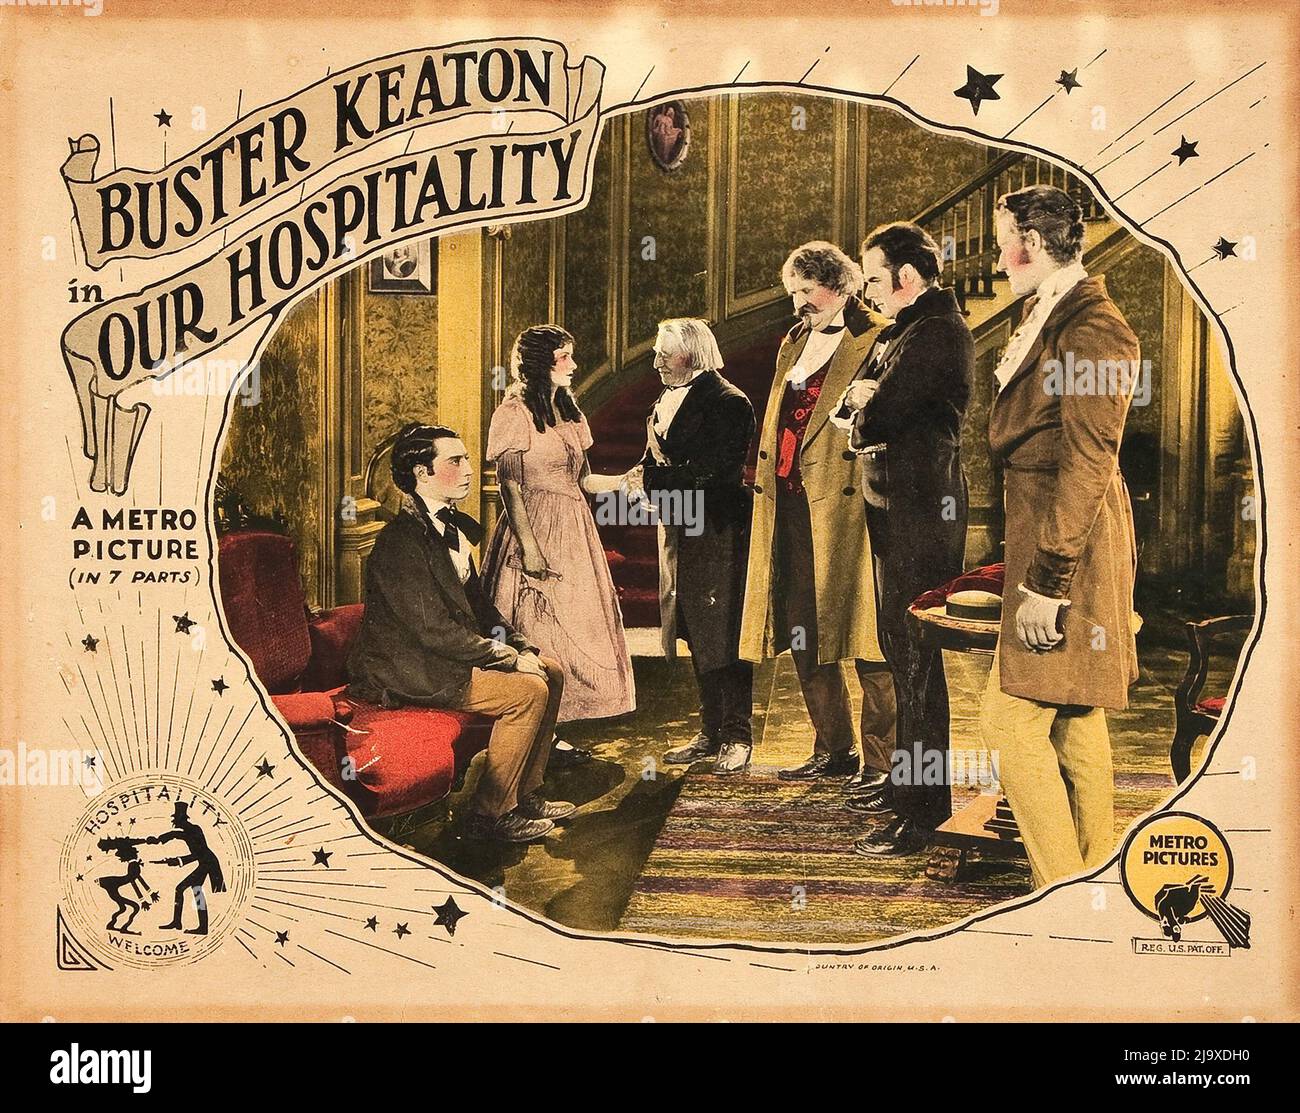 Buster Keaton Our Hospitality (Metro, 1923). Lobby Card. Old colorized photos. Vintage film poster. Stock Photo